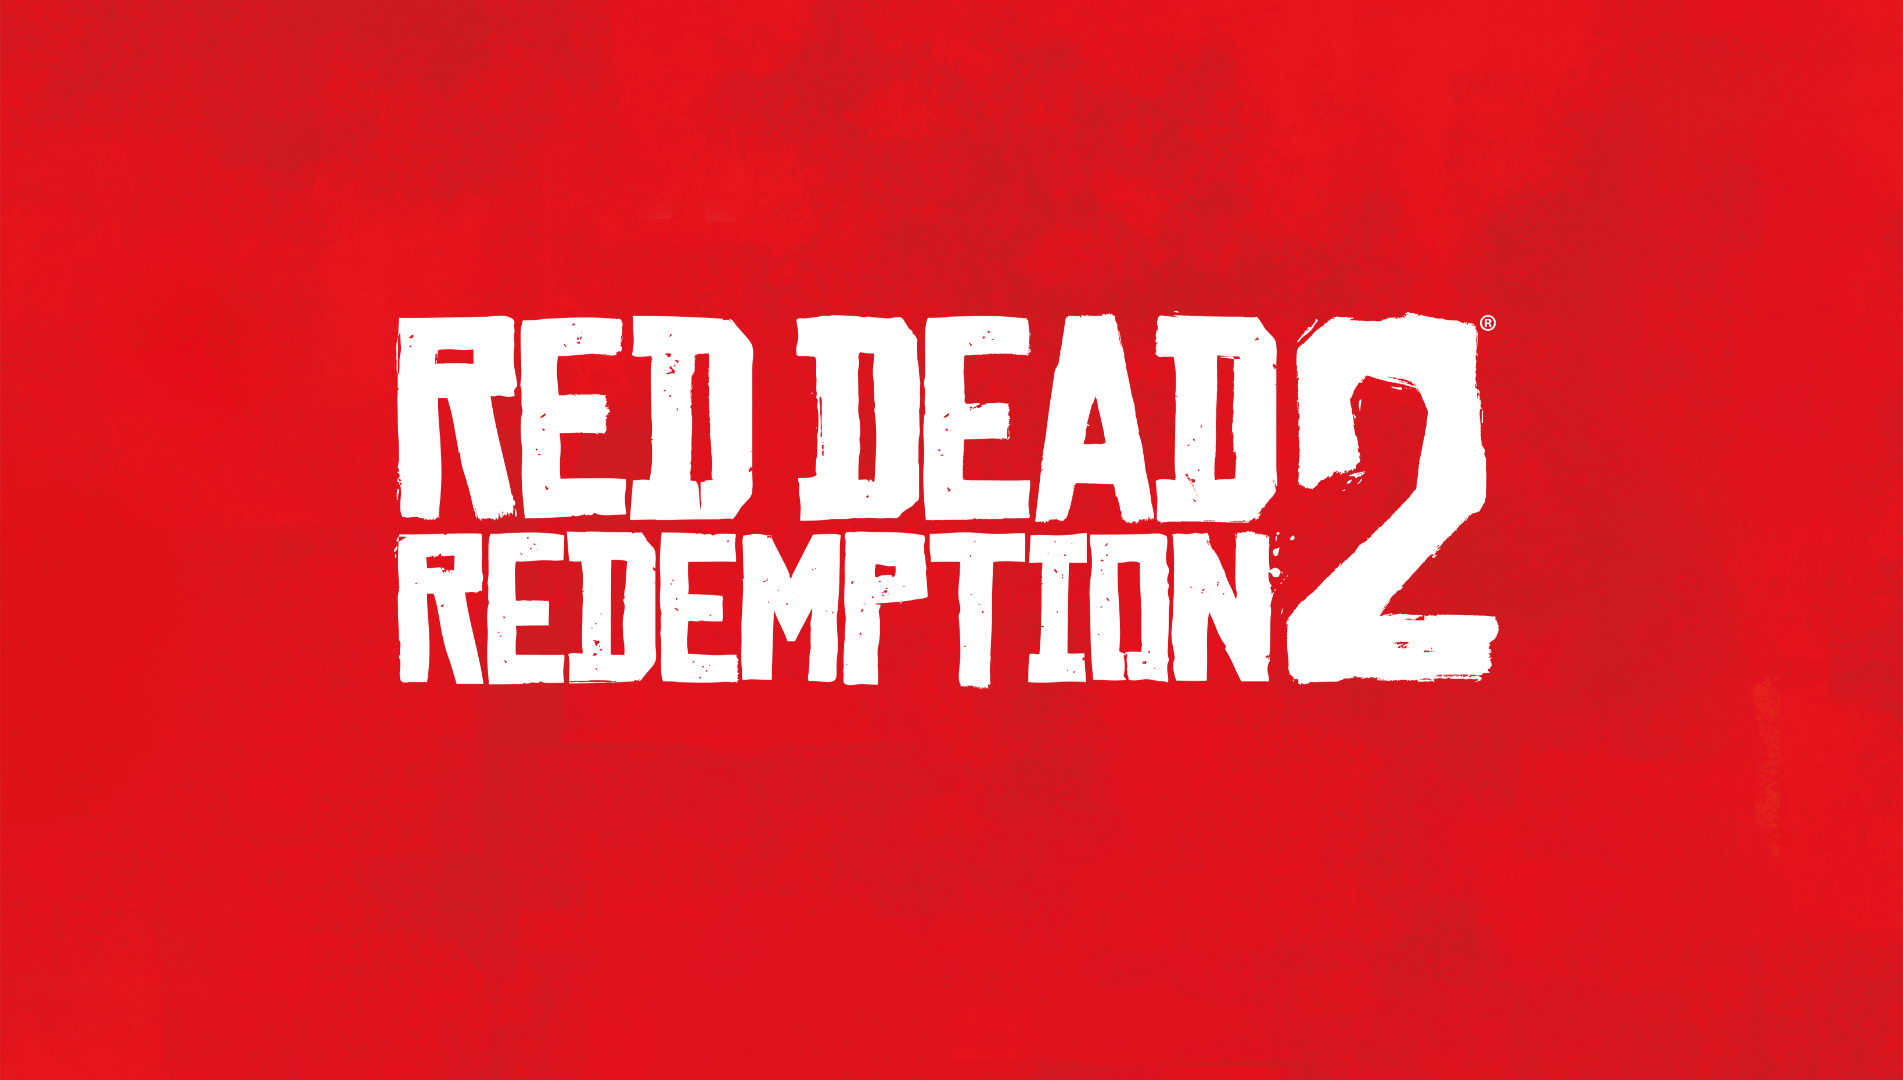 Red Dead Redemption 2 wallpaper, Video Game, HQ Red Dead Redemption